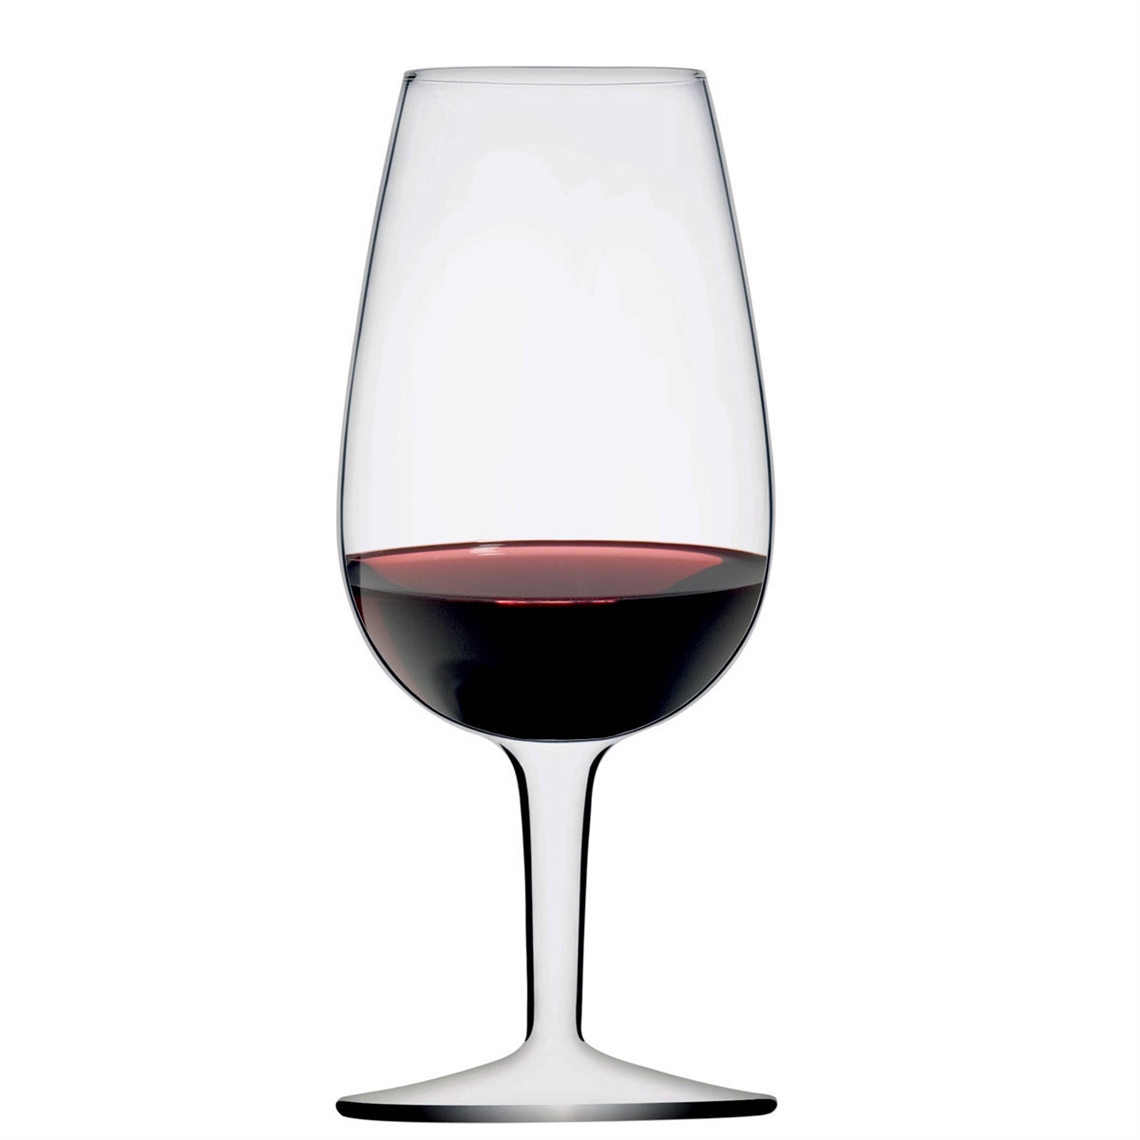 View more glass and co from our Wine Tasting Glasses range